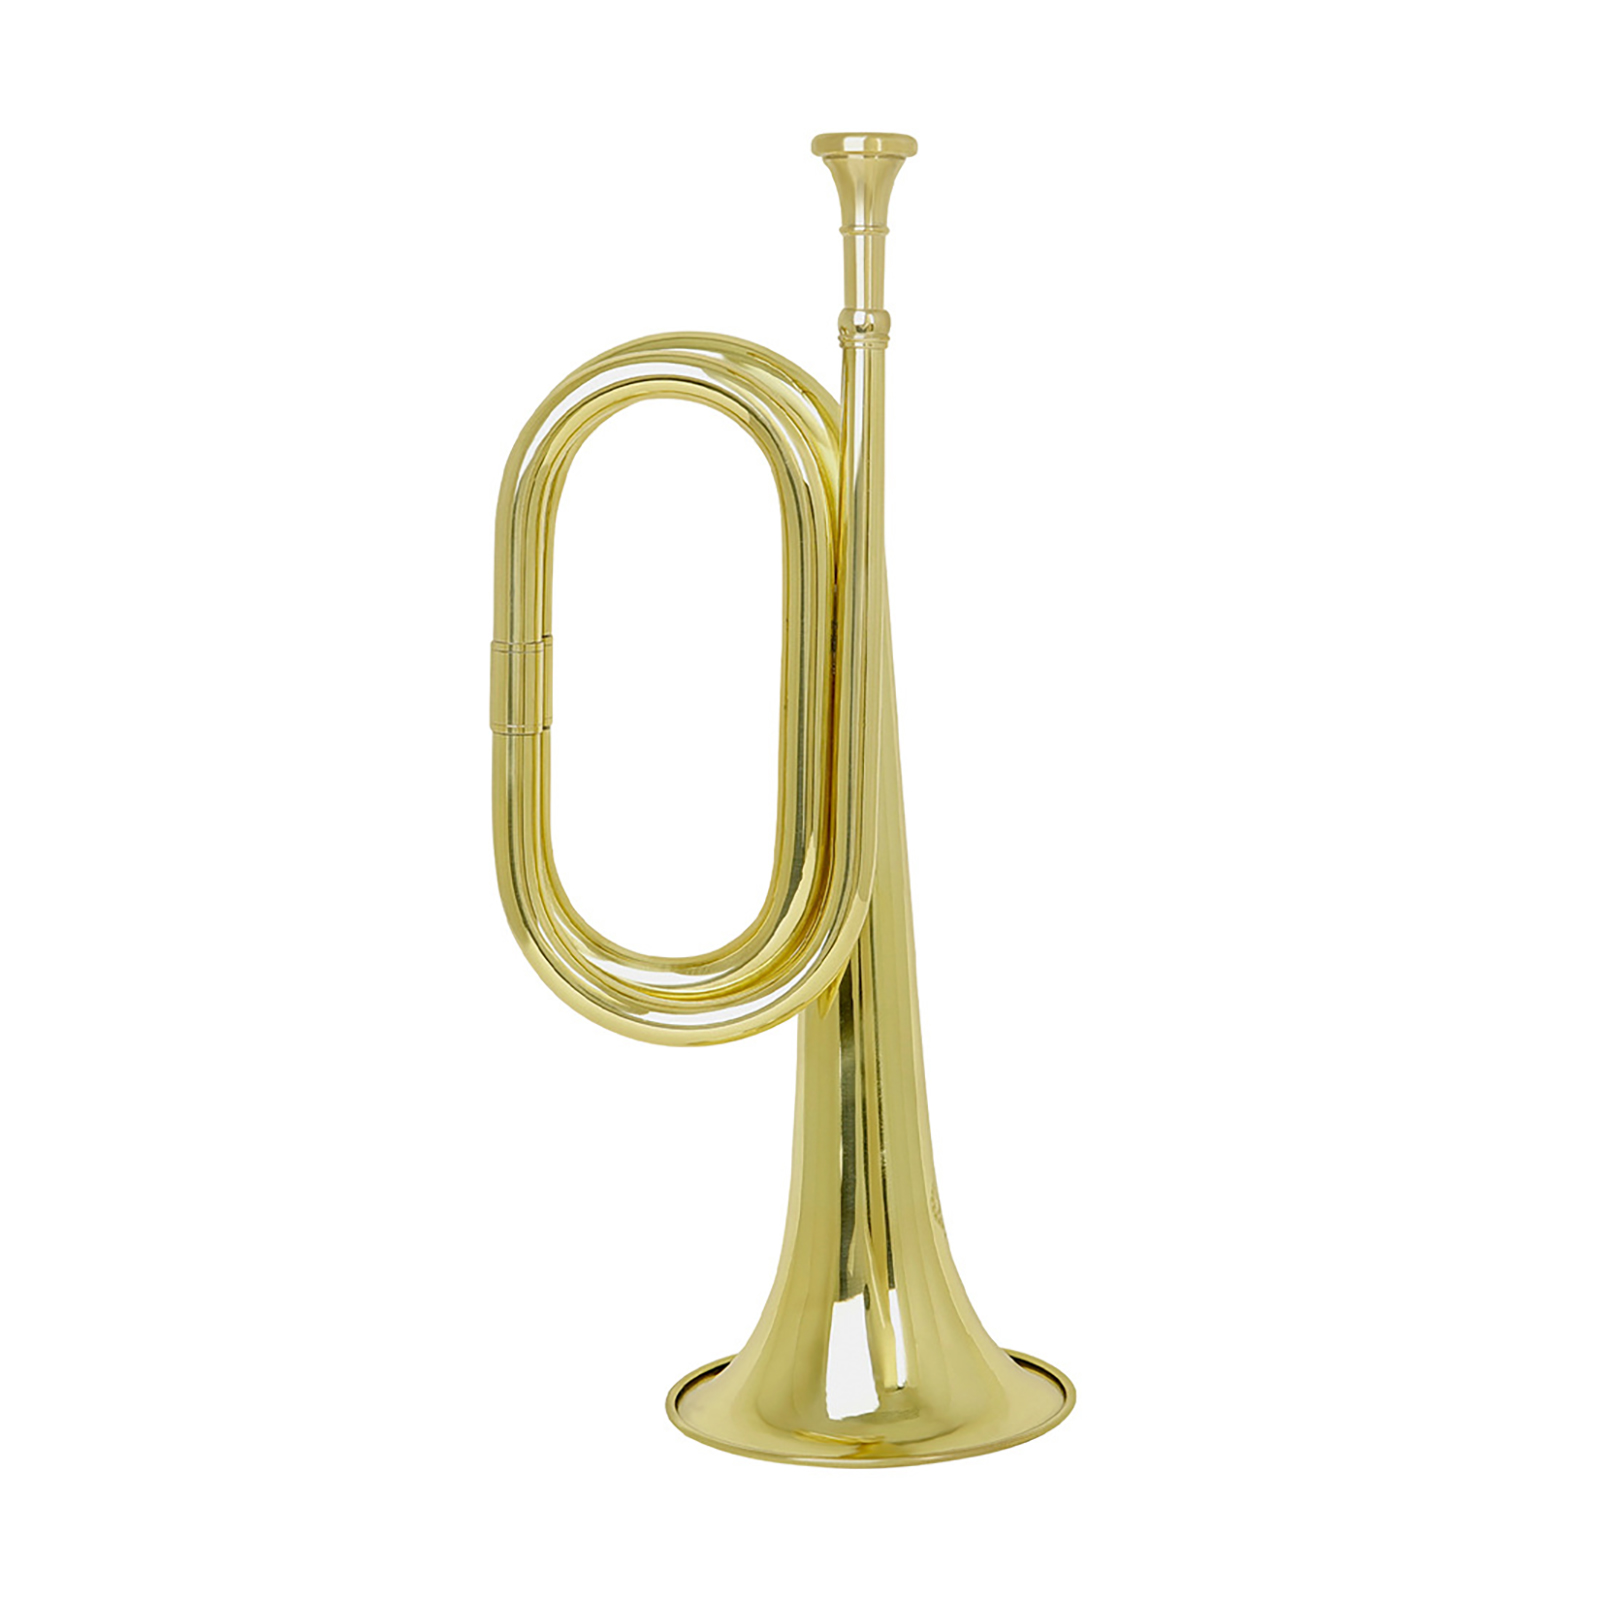 Bugle Trumpet Big Horn Thickened Tubes Curved Mouthpiece Interface Brass Horn School Wind Instrument